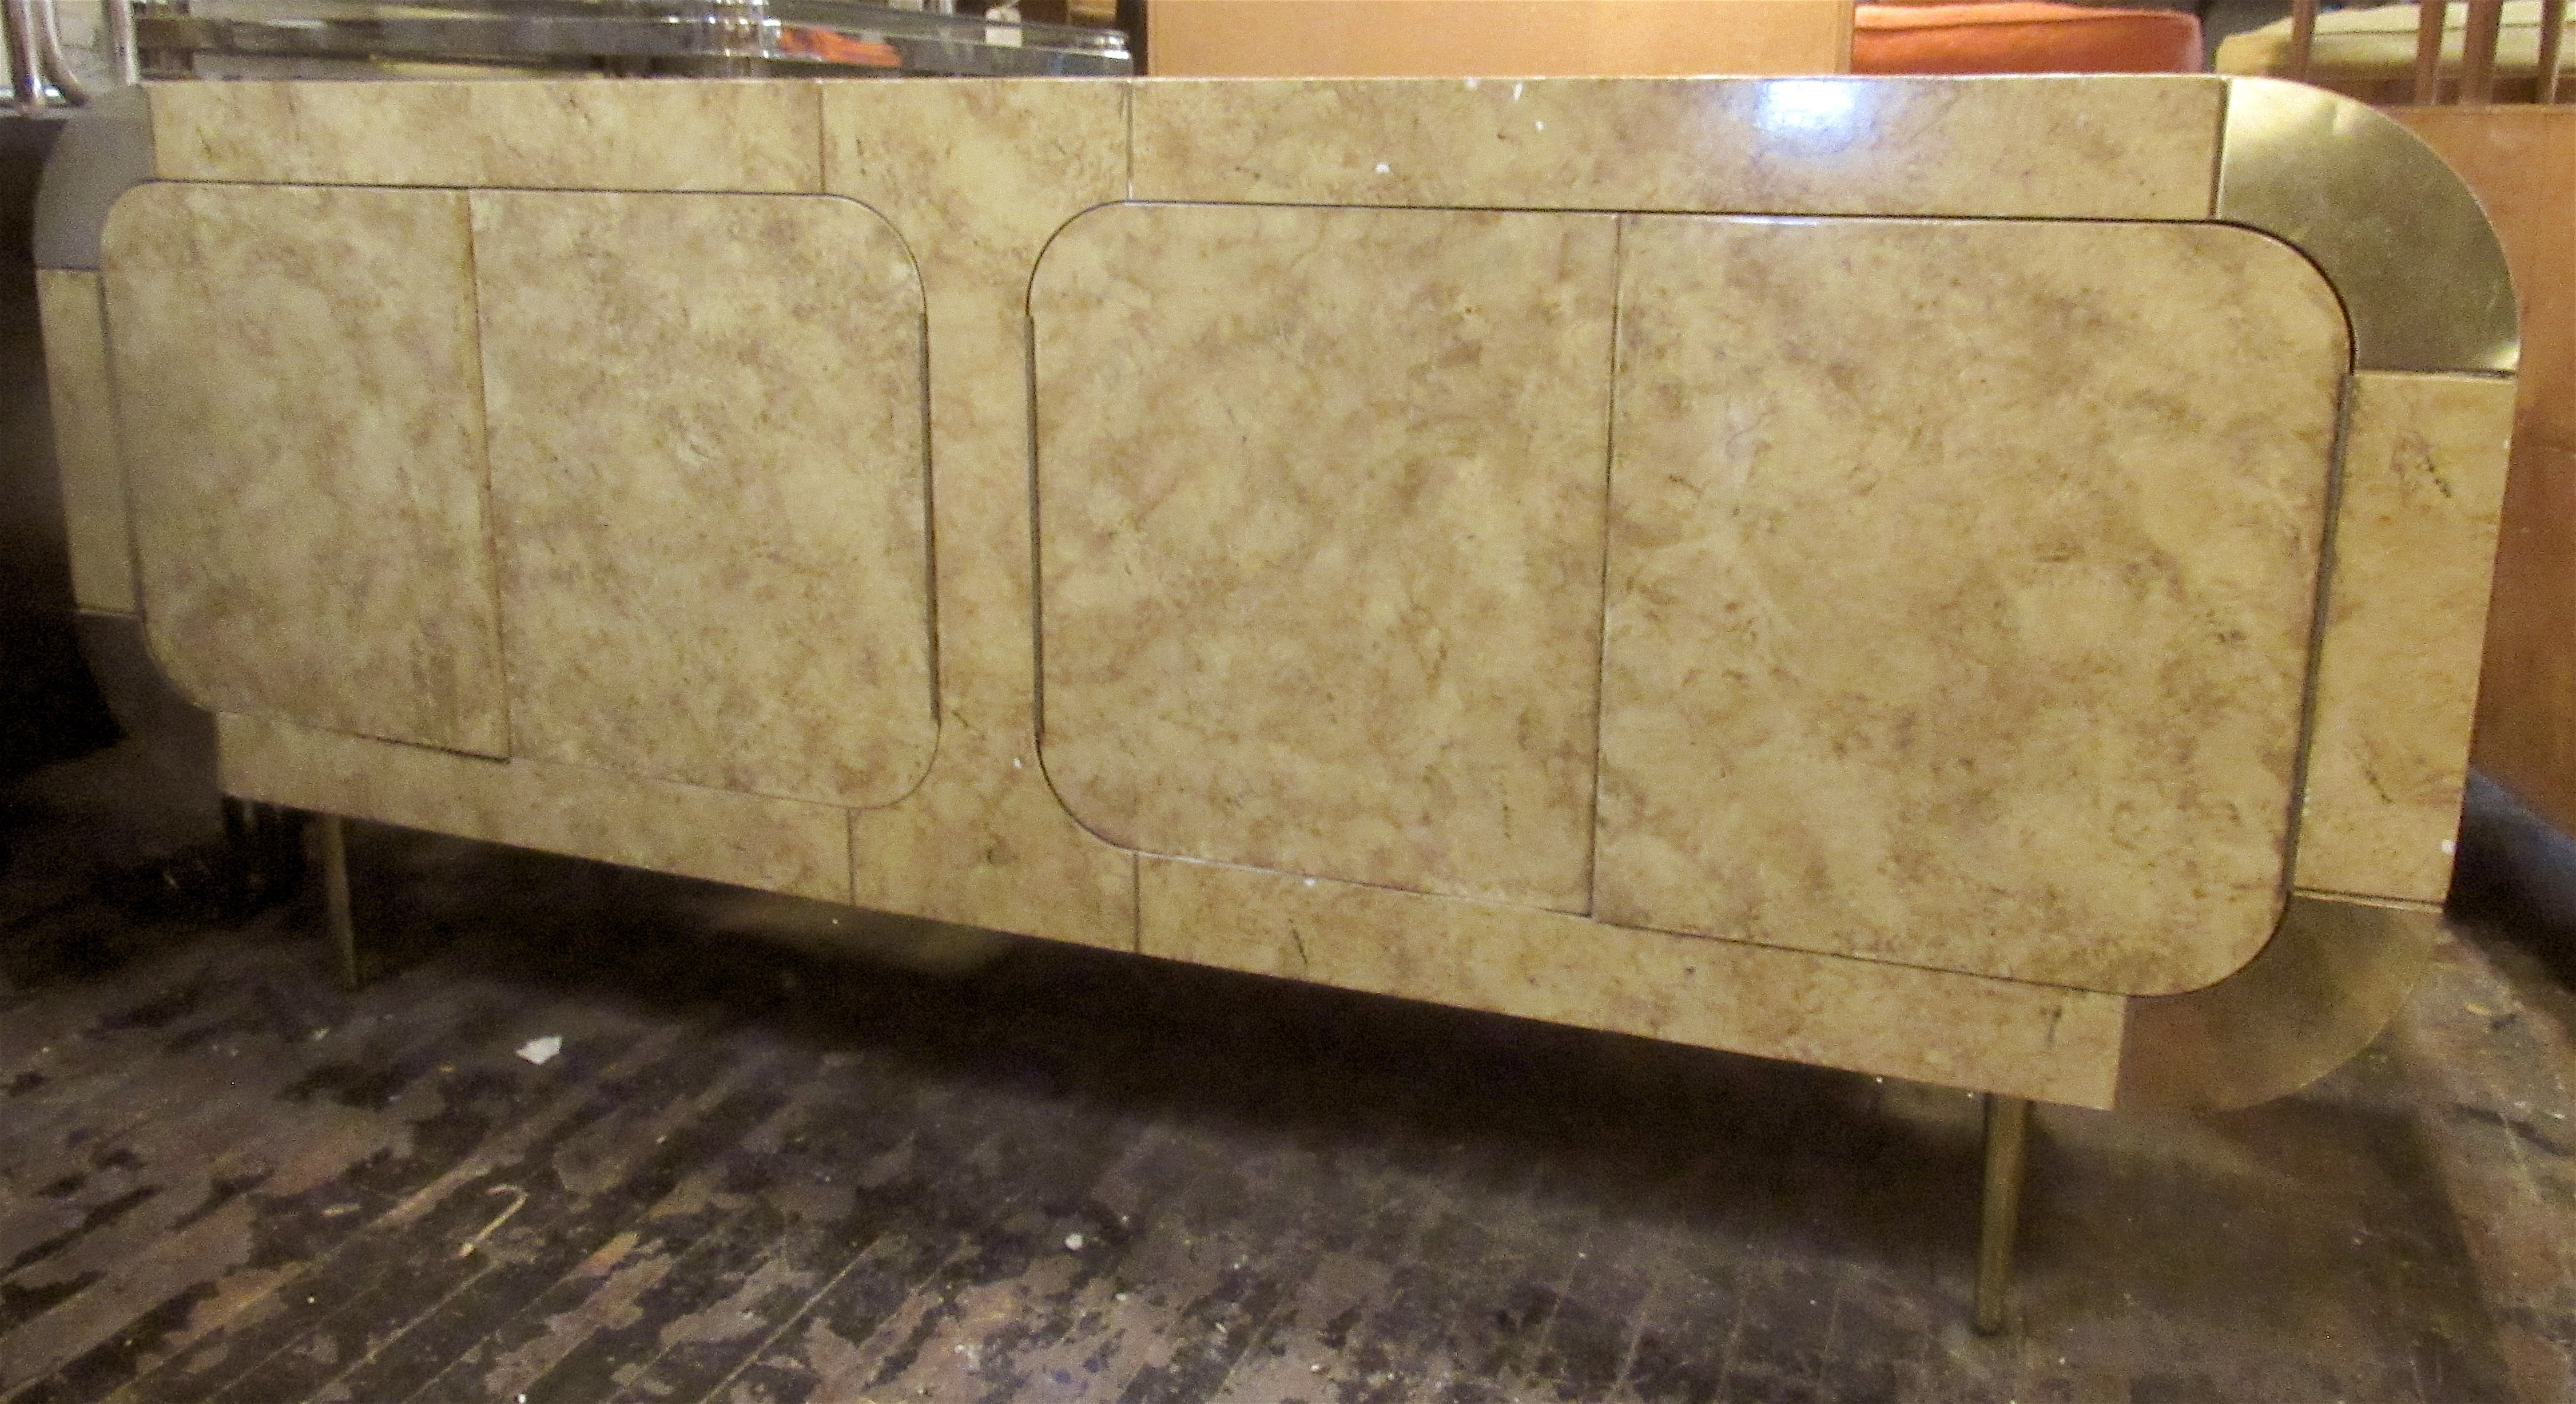 Mid-century modern rounded cabinet in a burl colored lacquered finish. Accented with polished brass corners and legs. Two large cabinets, great for bar or living room storage.
Please confirm location NY or NJ